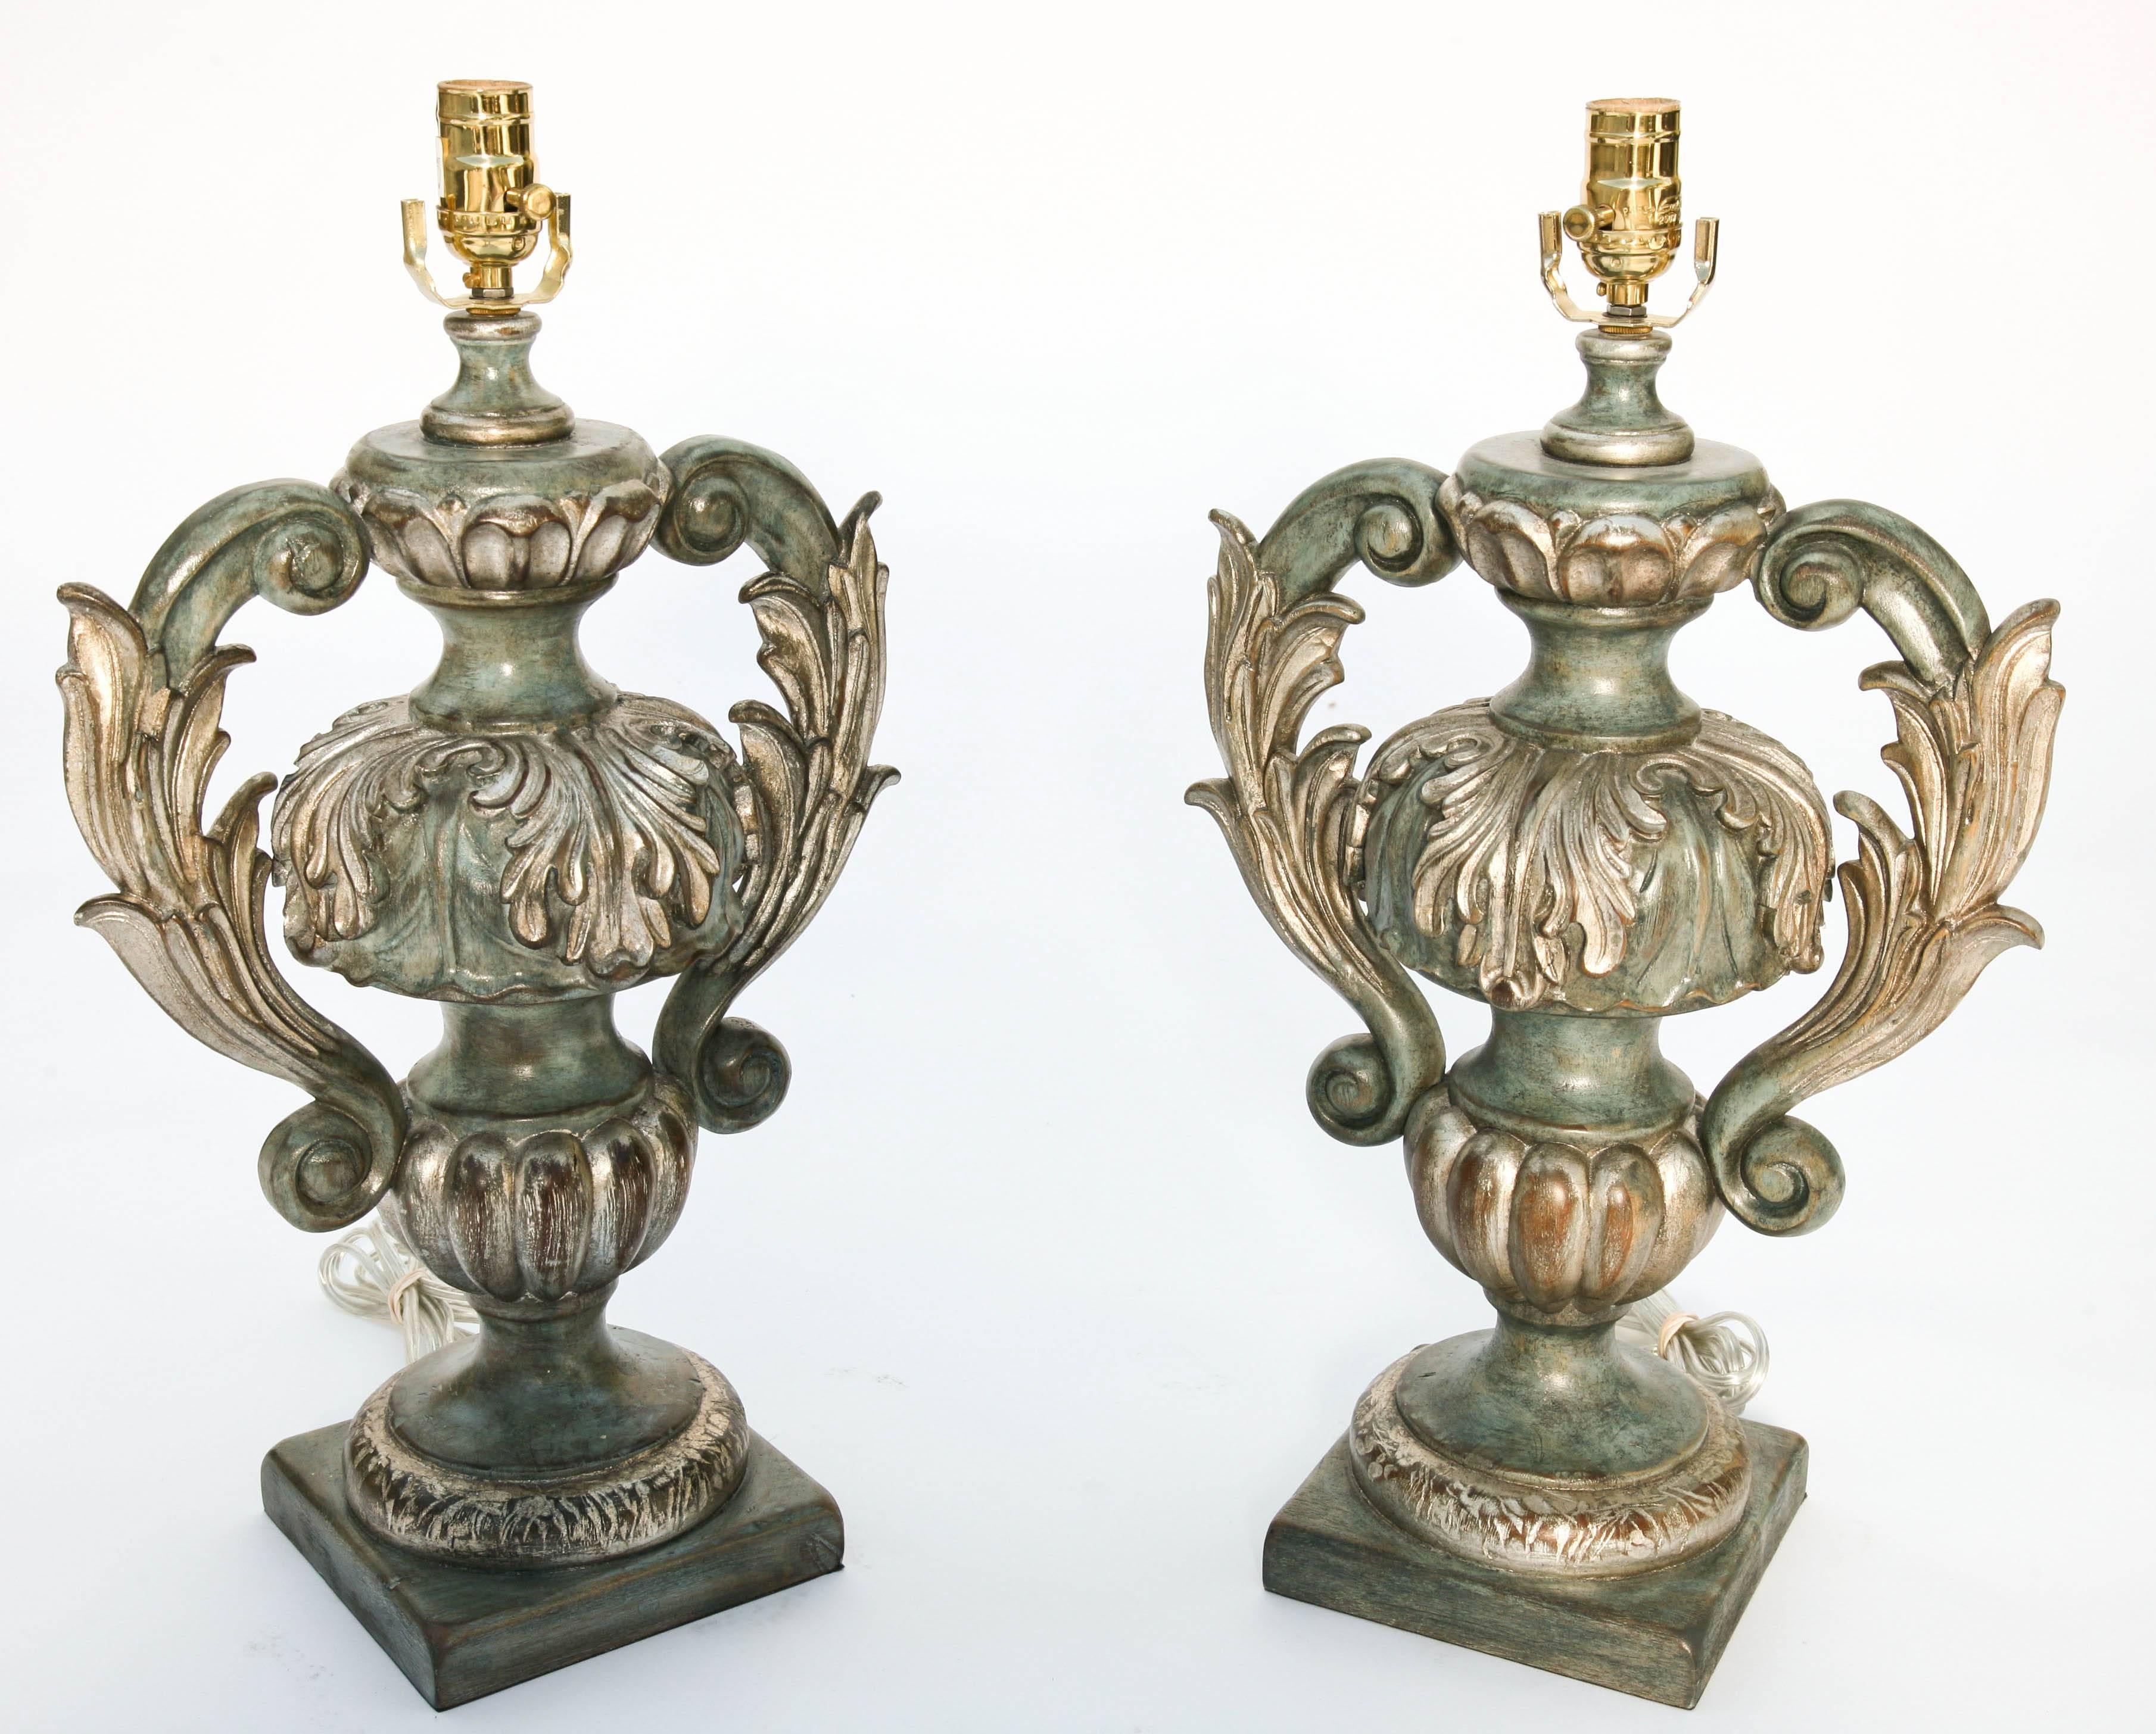 Pair of lamps, painted and parcel silver gilt finish, each an urn-form, with elaborate foliate-carved, scrolling handles, raised on fluted socle, and round foot on a square base.

Stock ID: D9373